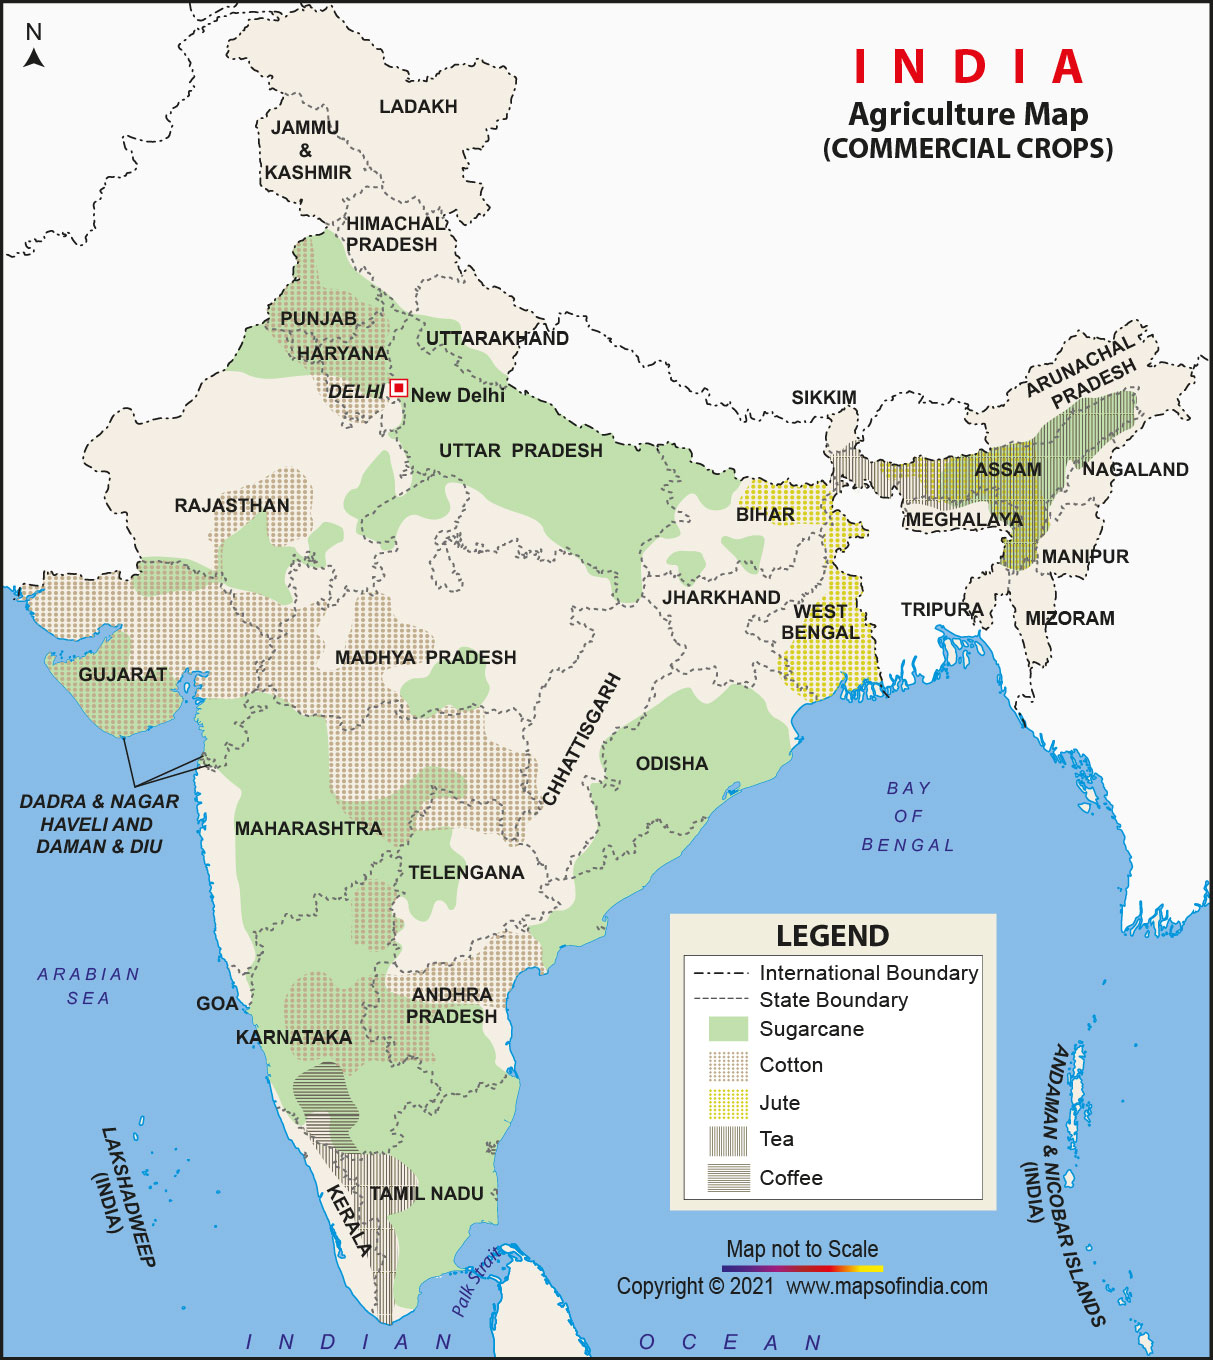 agriculture indian agricultural map of india Commercial Crops In India Commercial Crops Map Of India agriculture indian agricultural map of india